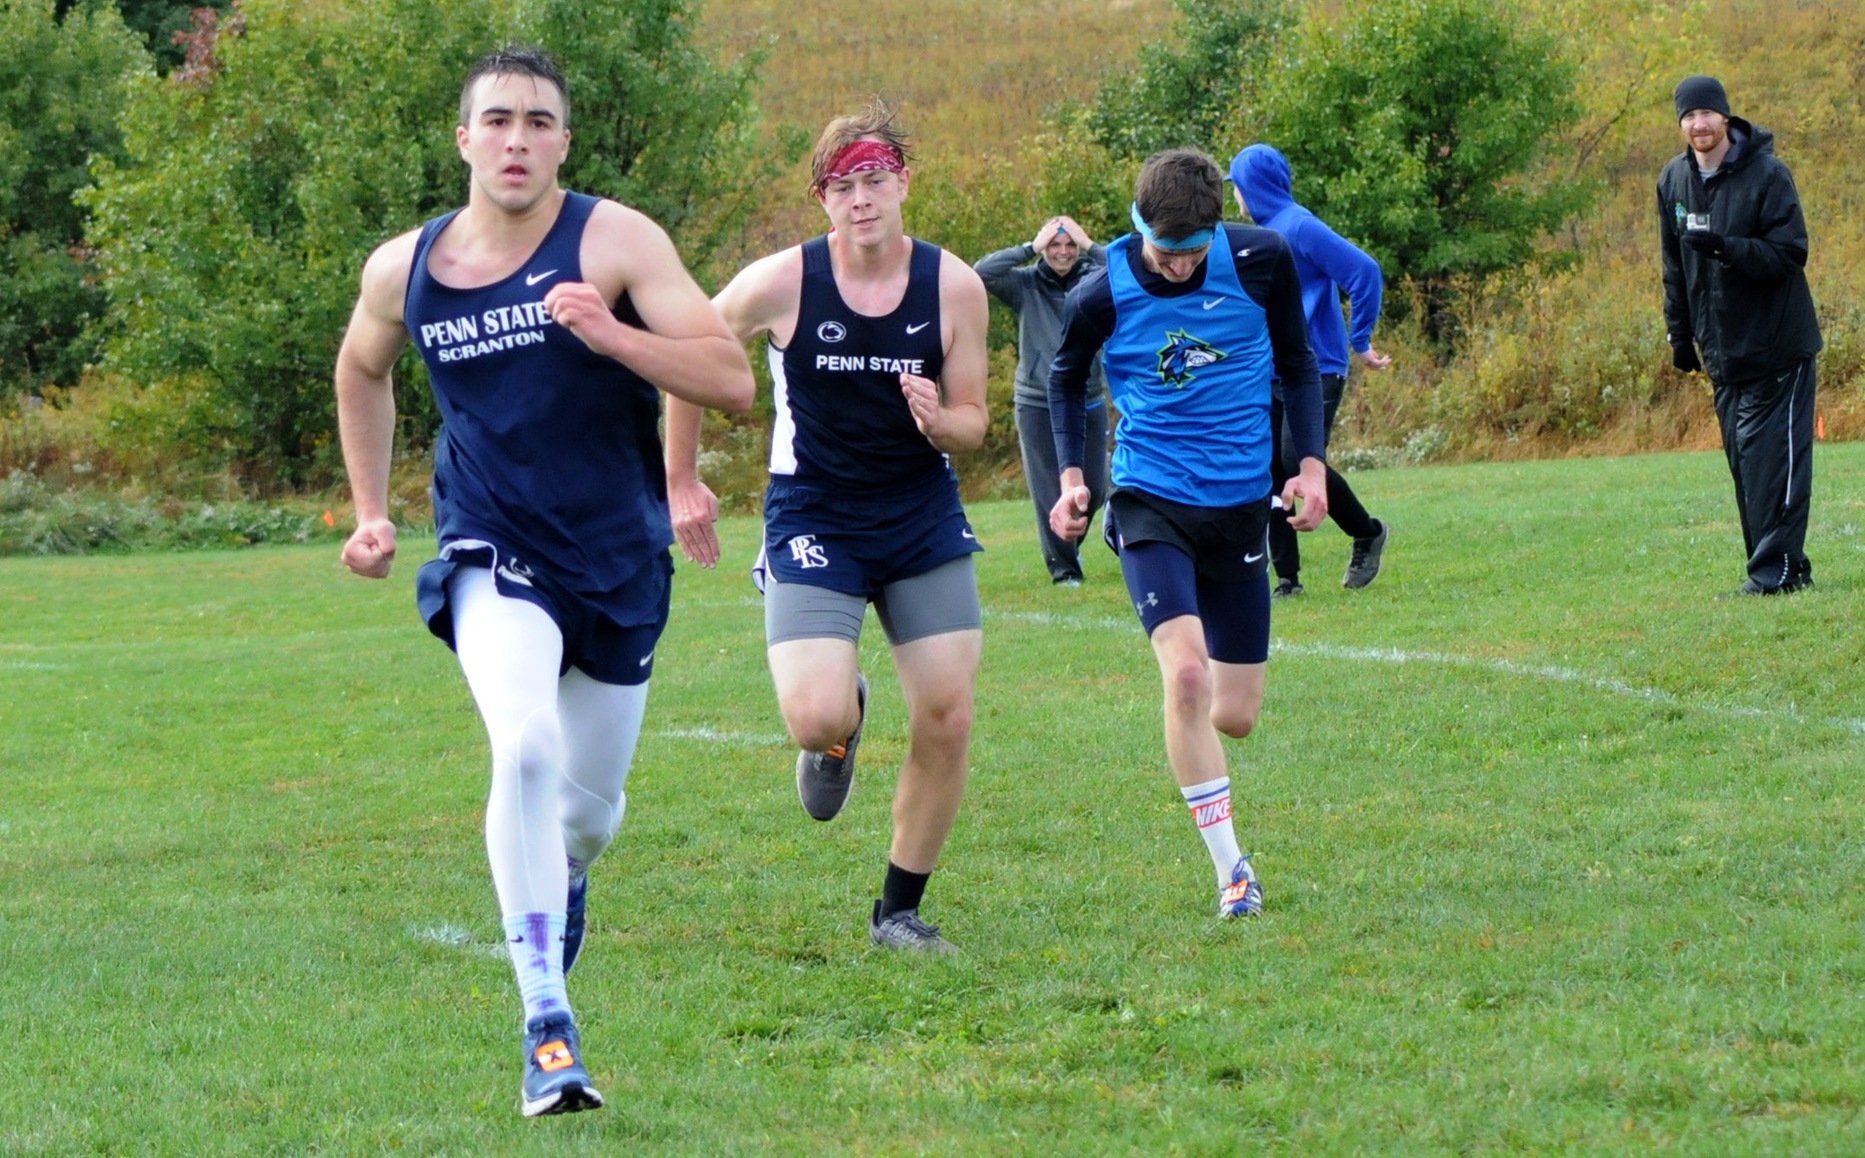 Freshman Men's Cross Country runner Stephen Lafata races to the finish at Penn State Fayette's Invitational on October 12, 2019.